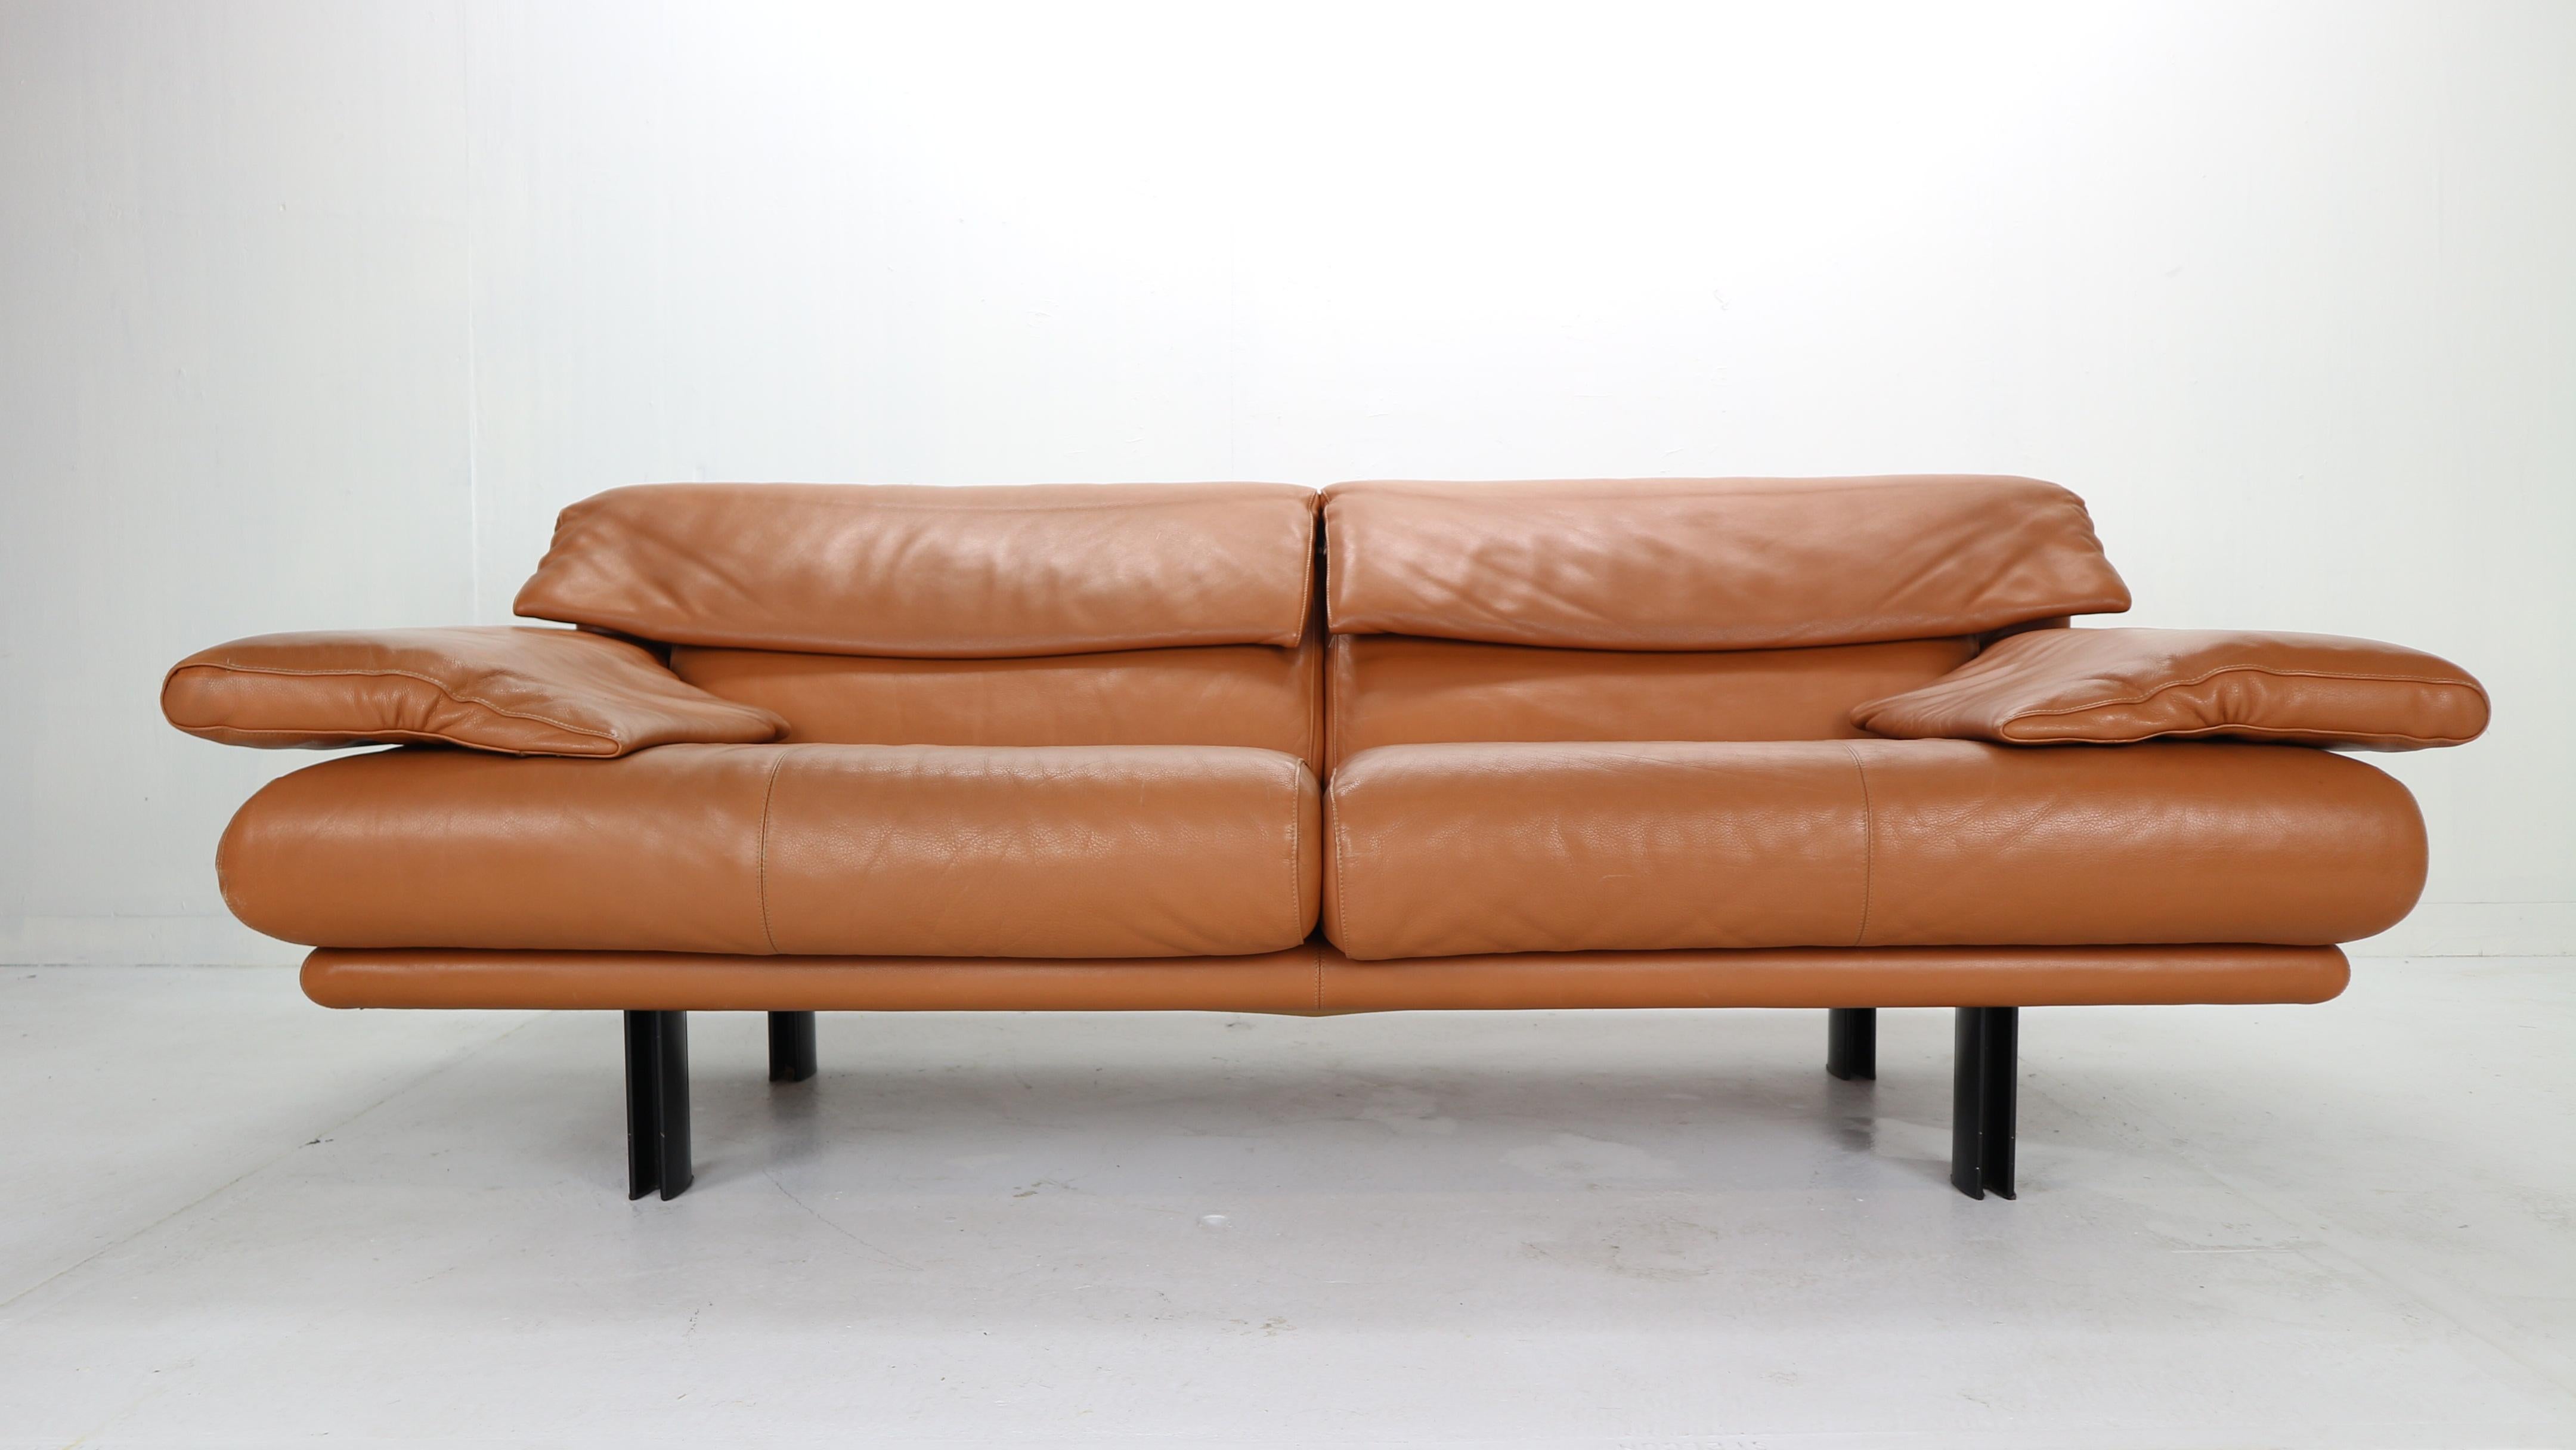 Cleverly designed 'Alanda' sofa by Paolo Piva for B&B Italia in 1980s, Italy.
Cognac colour leather seatings. 
Adjustable armrests and backrests supported by four black enamel metal legs.
An extremely elegant and comfortable sofa. 
Retain original